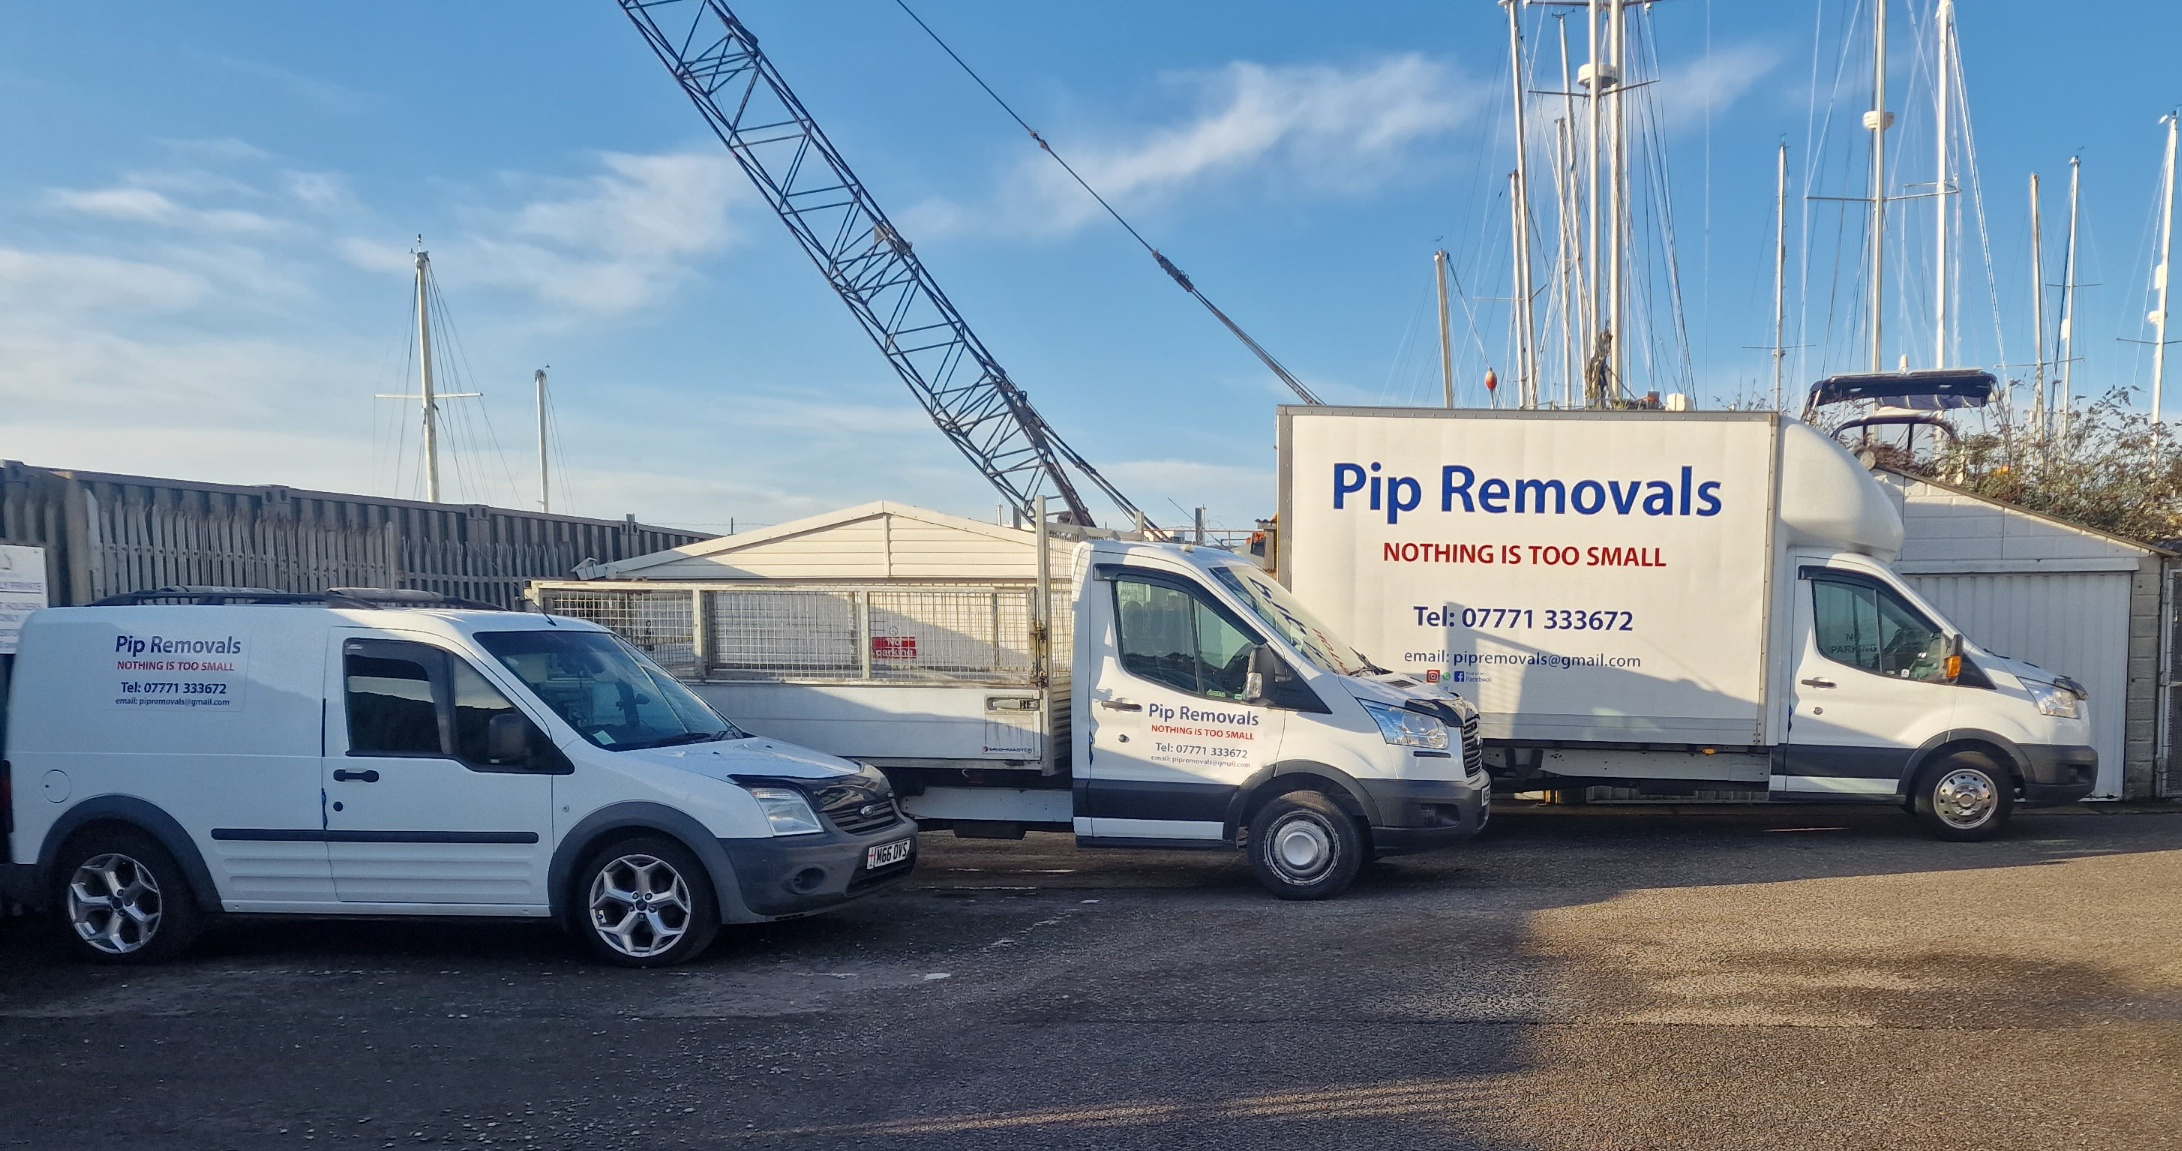 Pip Removals